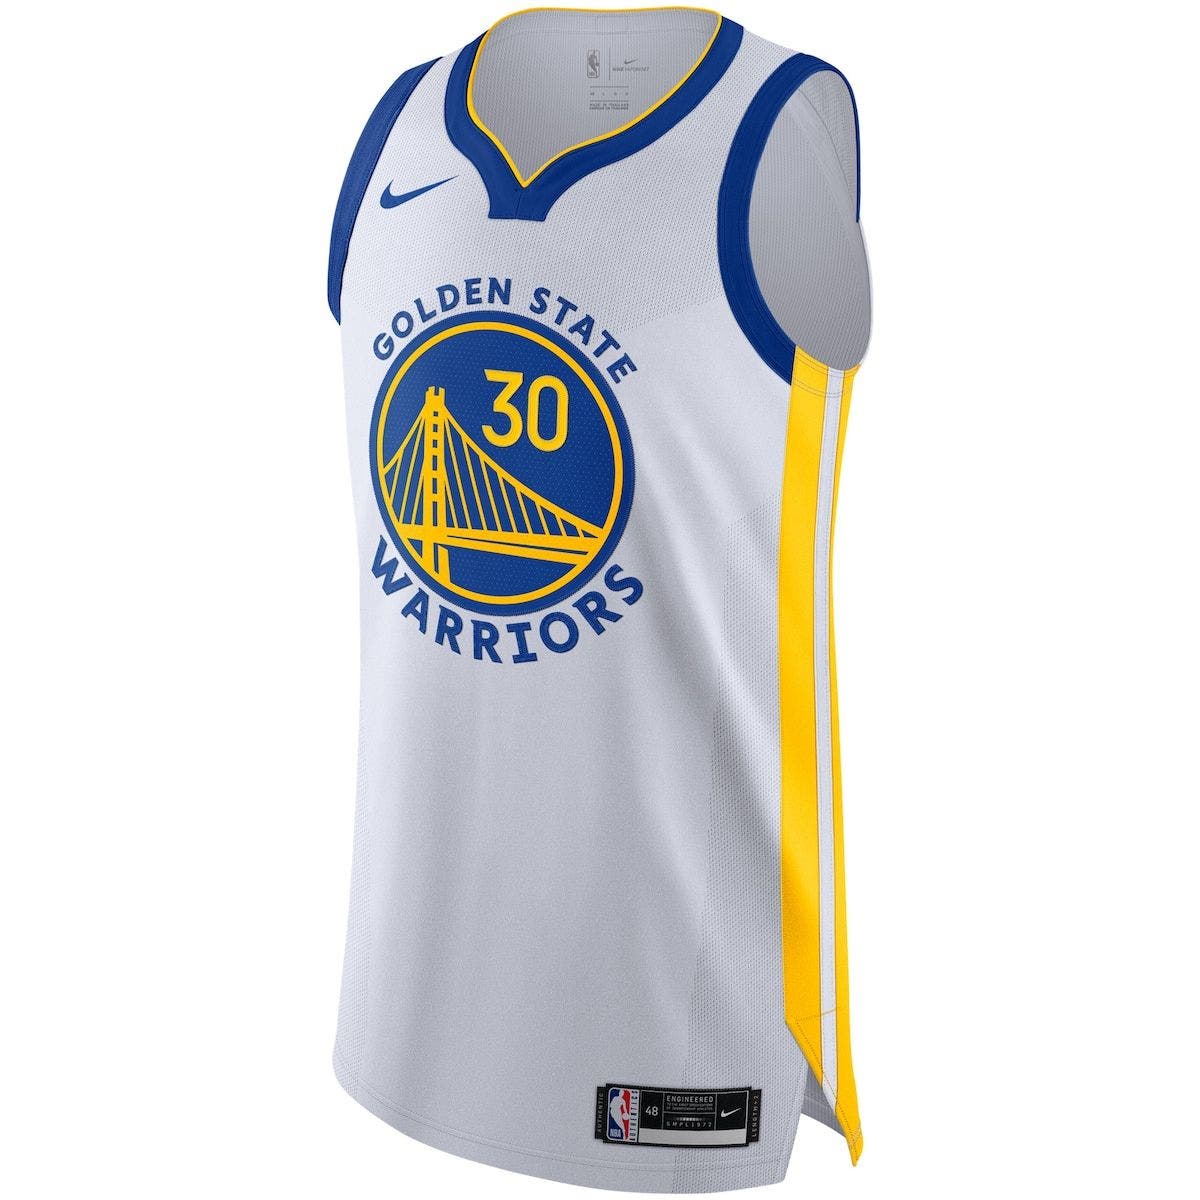 Men's Nike Golden State Warriors No30 Stephen Curry White NBA Authentic Association Edition Jersey